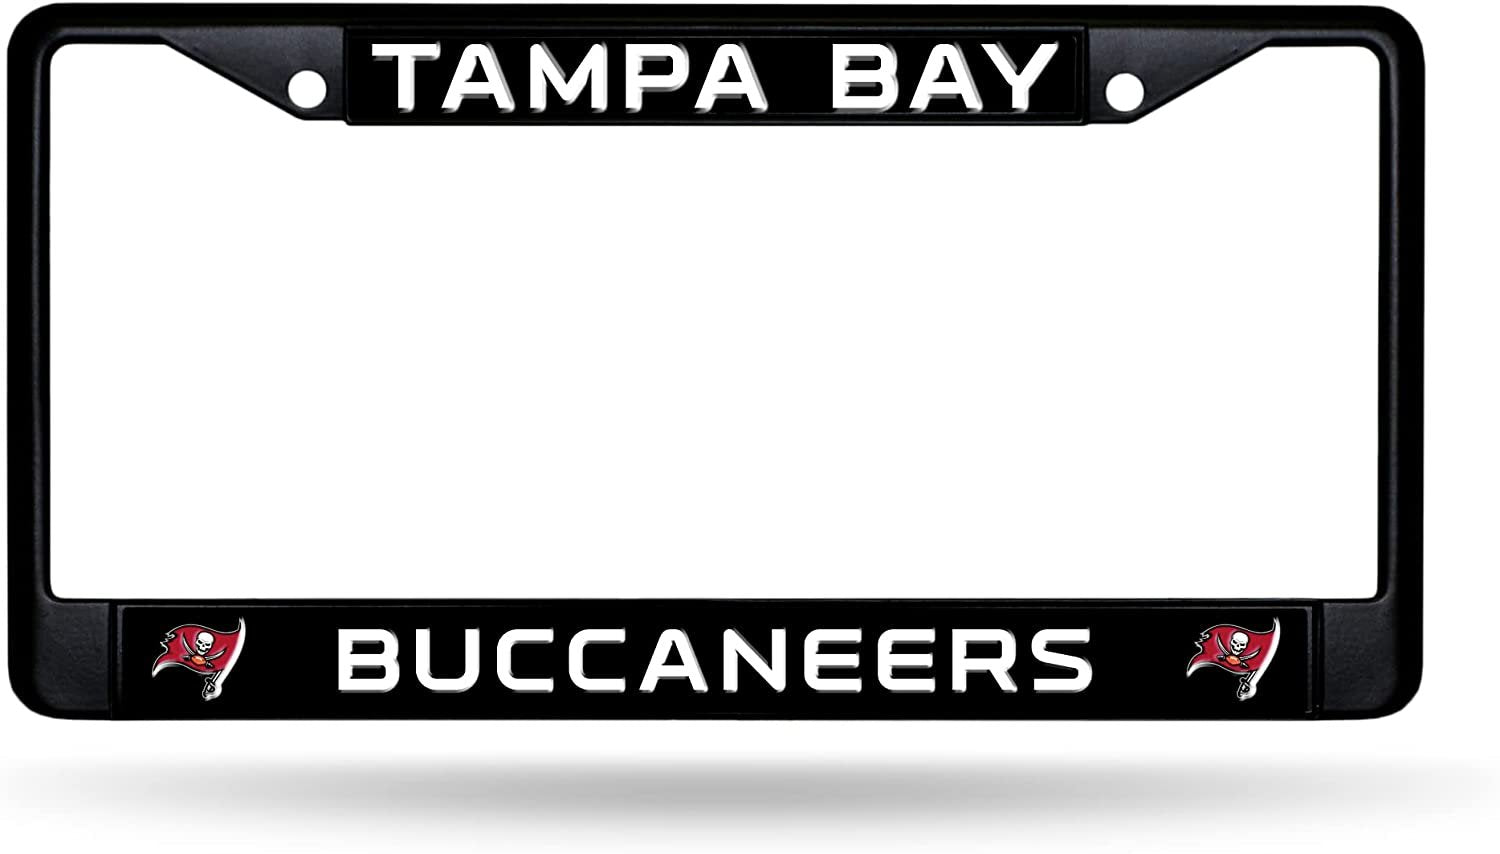 Tampa Bay Buccaneers Black Metal License Plate Frame Chrome Tag Cover 6x12 Inch